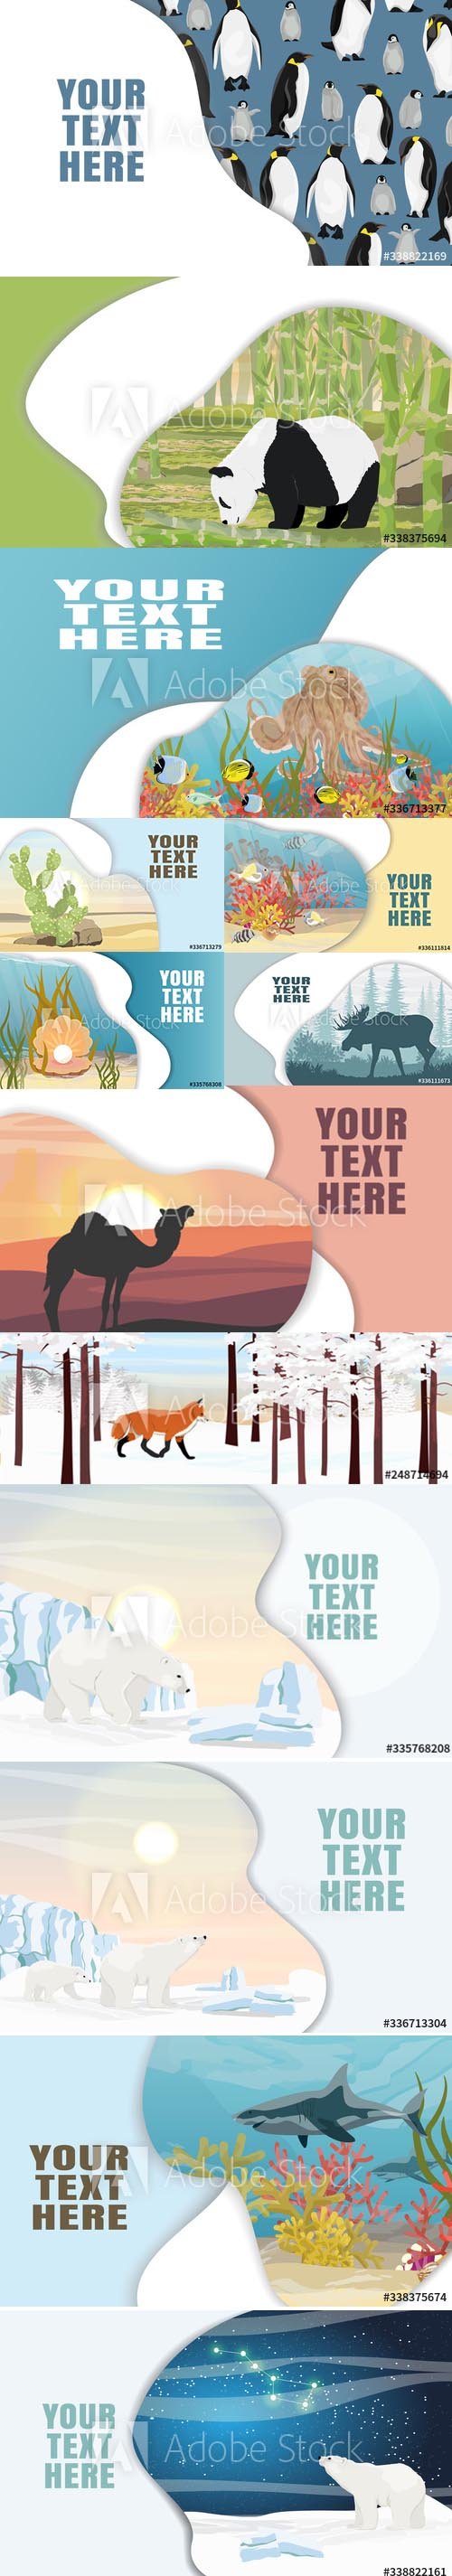 Landing page Vector template with multi-level shadows and the image of animals